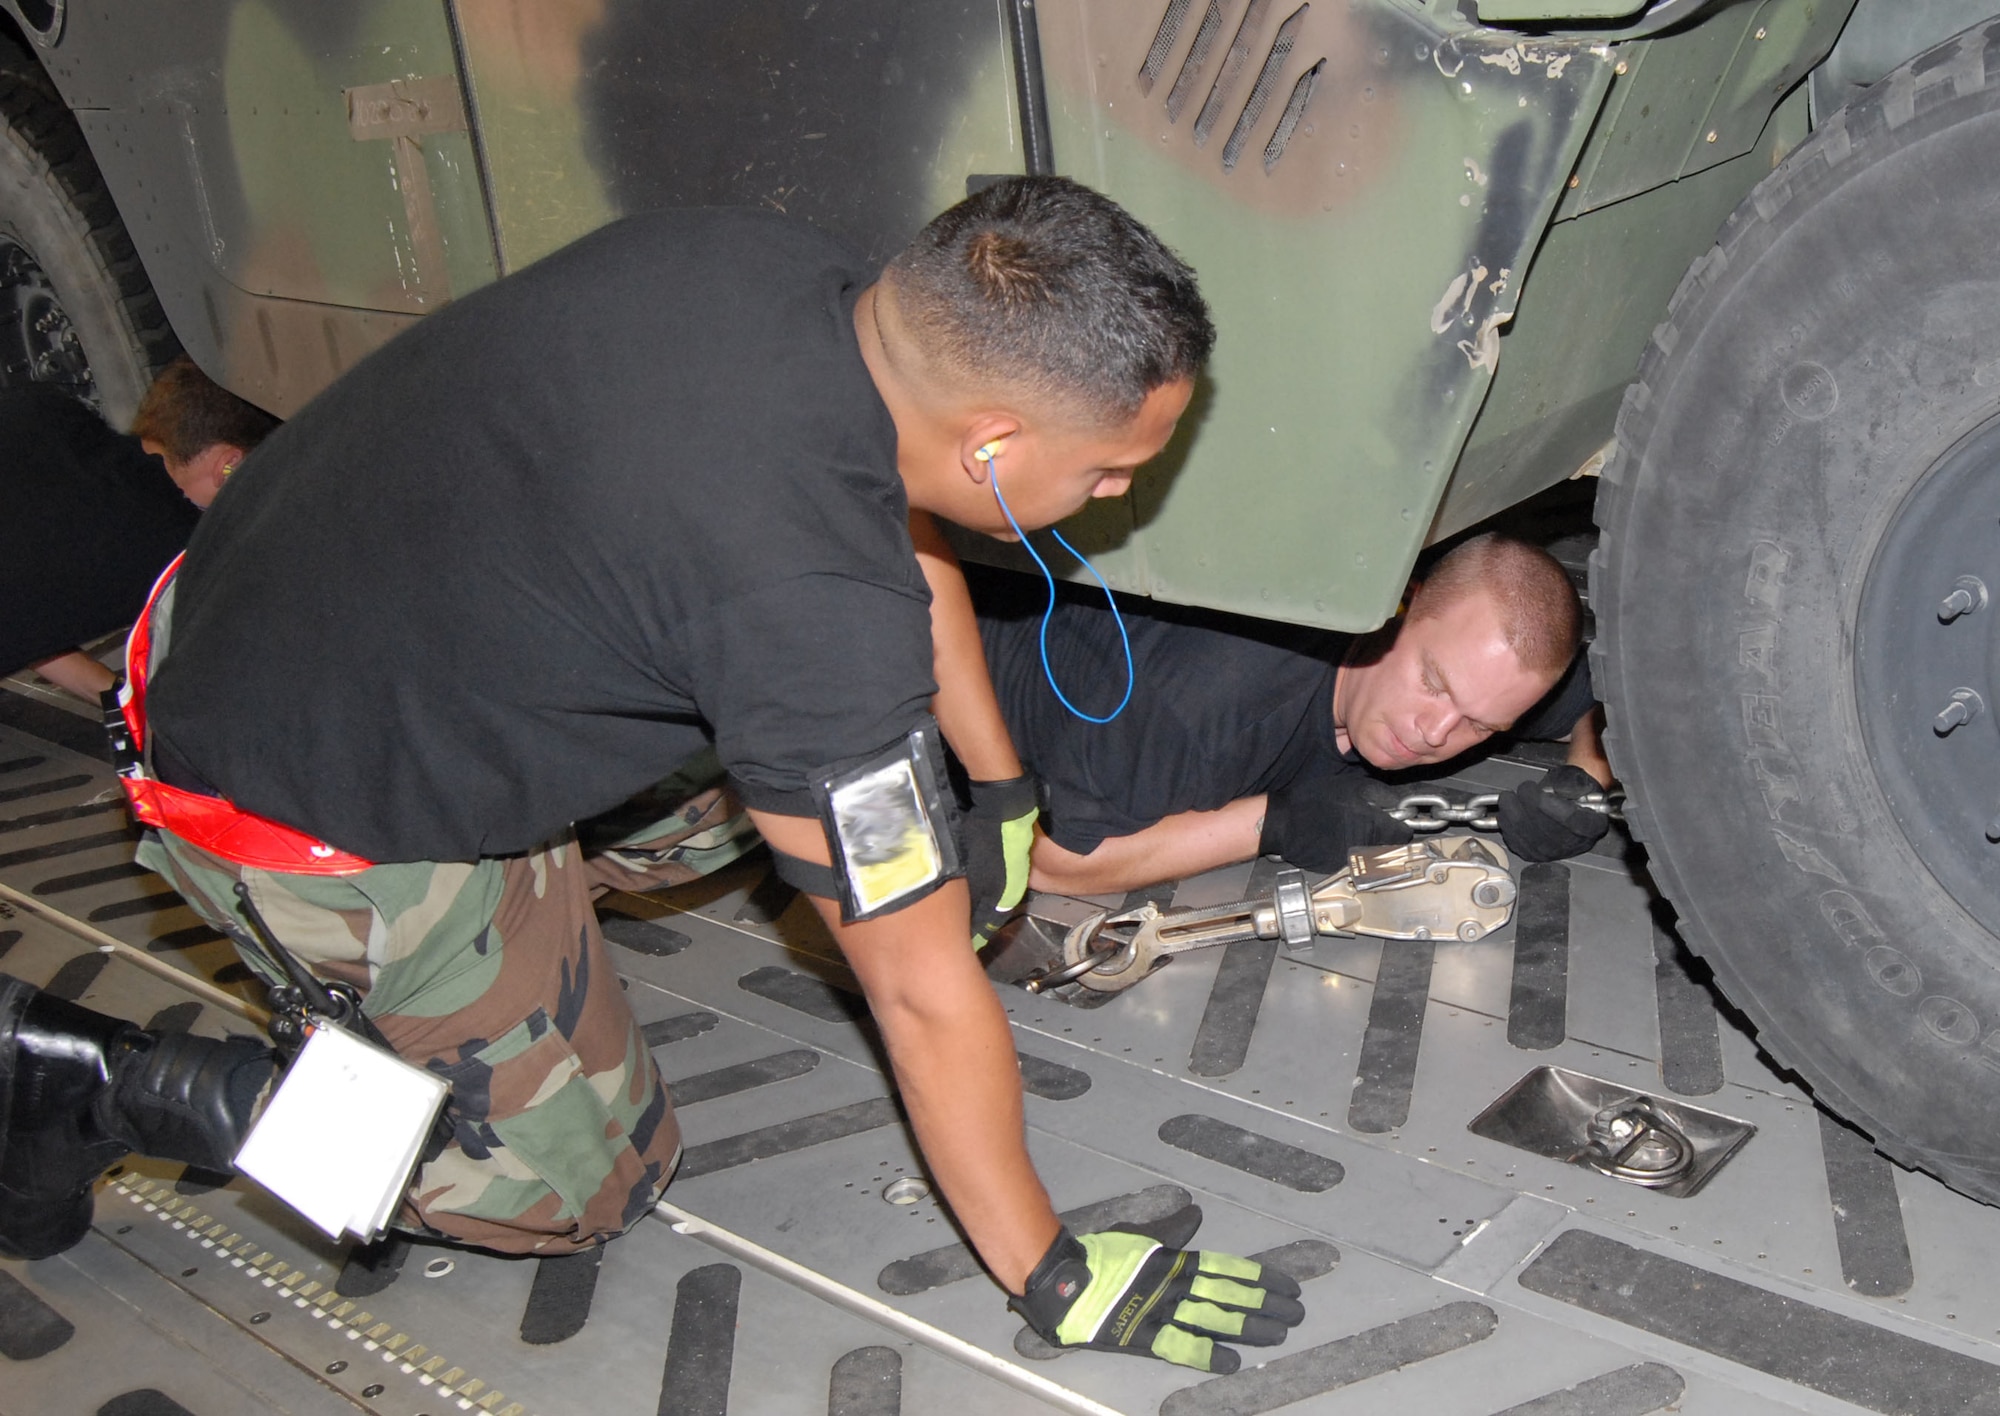 Members of the 3rd Aerial Port Squadron at Pope Air Force Base, N.C., tie down a Humvee that was deployed to Brownsville, Texas, Aug. 19 along with about 40 members of the 43rd Aeromedical Evacuation Squadron in preparation for Hurricane Dean relief efforts. (U.S. Air Force photo/Ed Drohan)